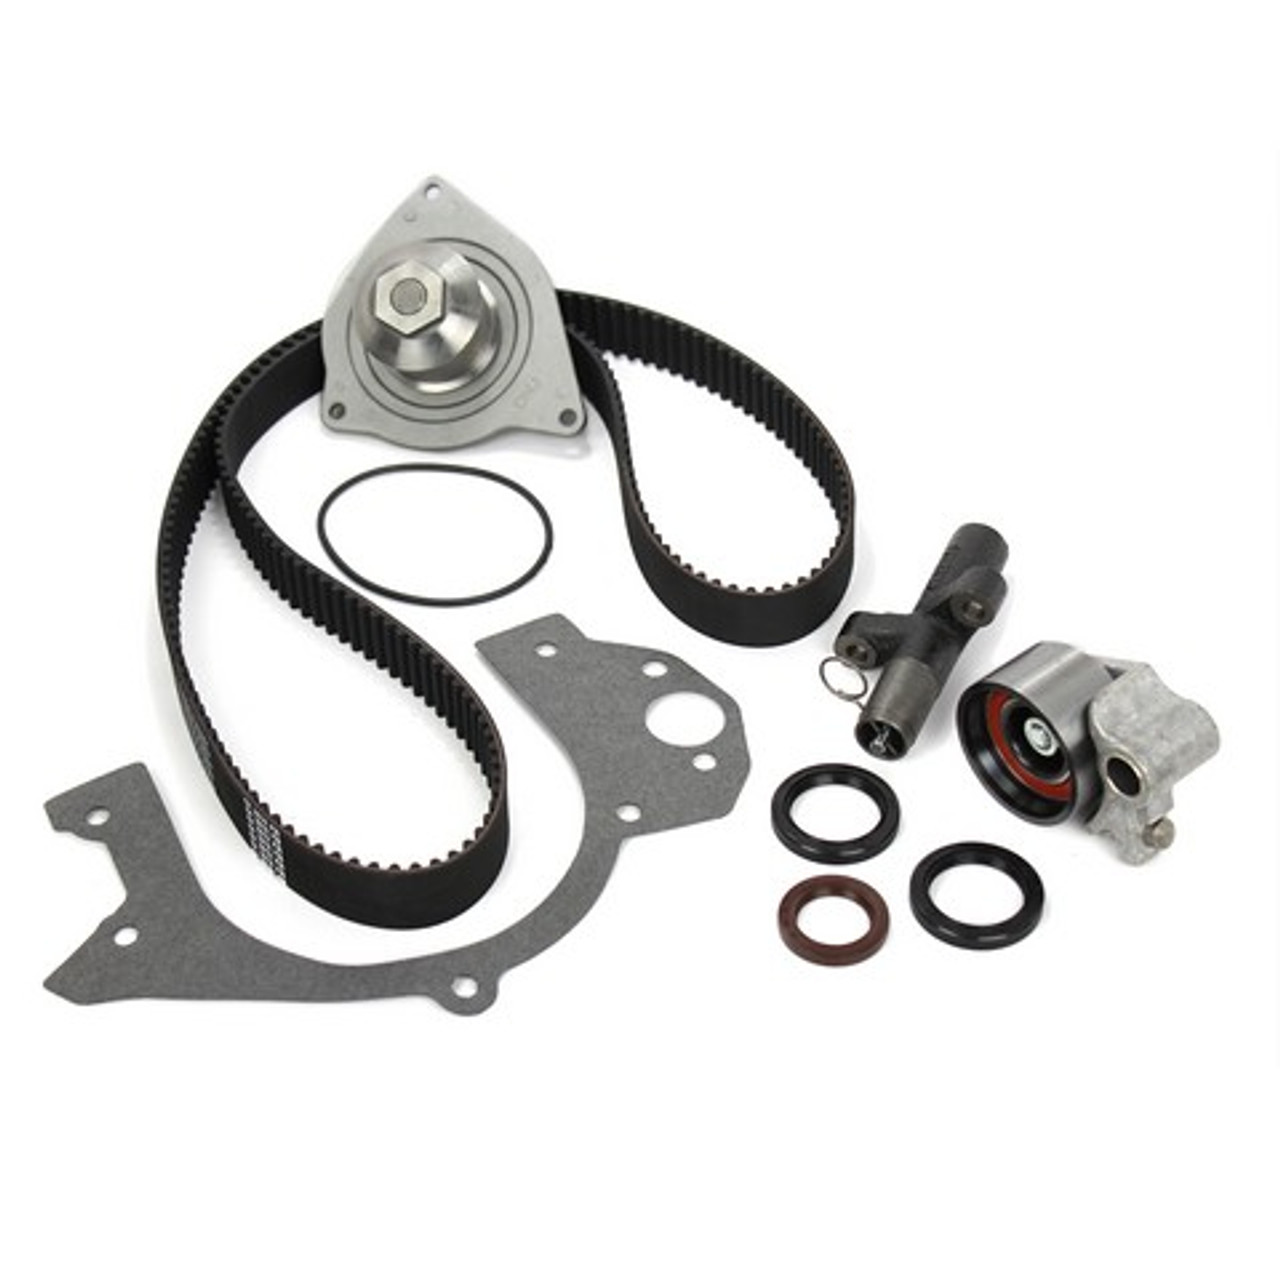 Timing Belt Kit with Water Pump 3.5L 1994 Chrysler LHS - TBK1145WP.3